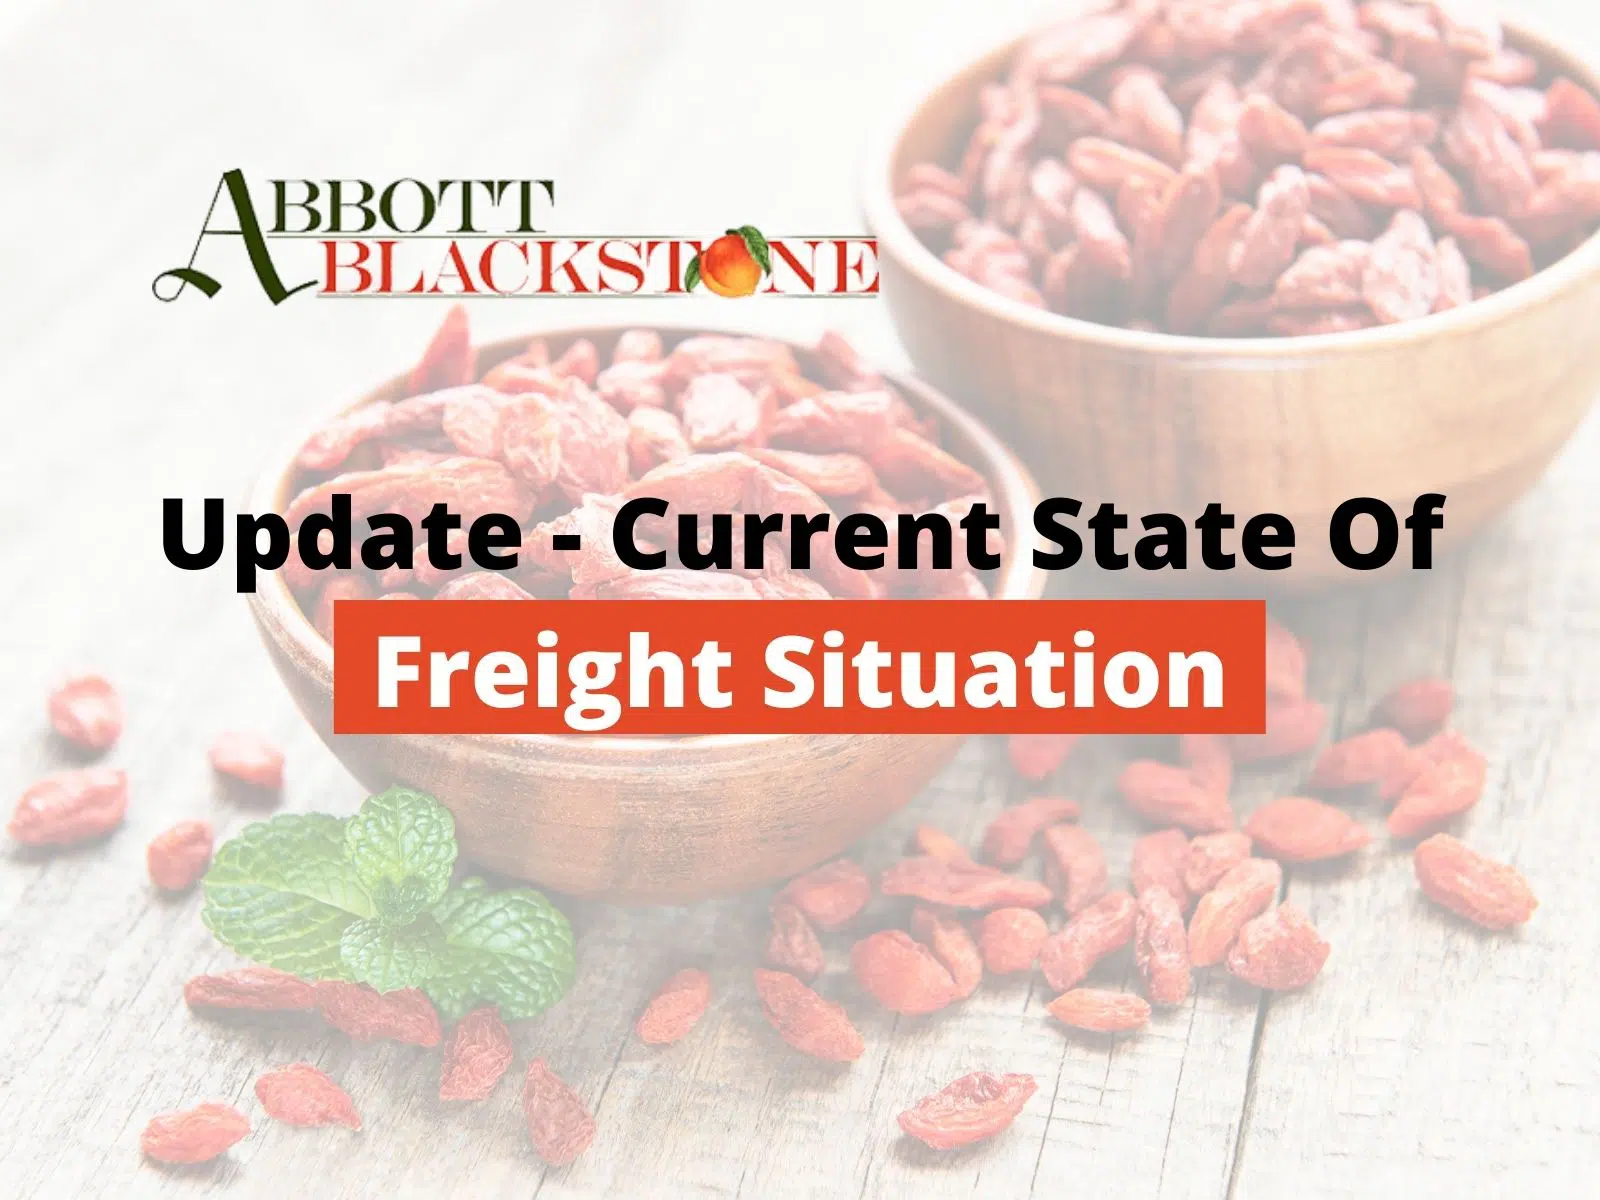 Update - Current State Of Freight Situation